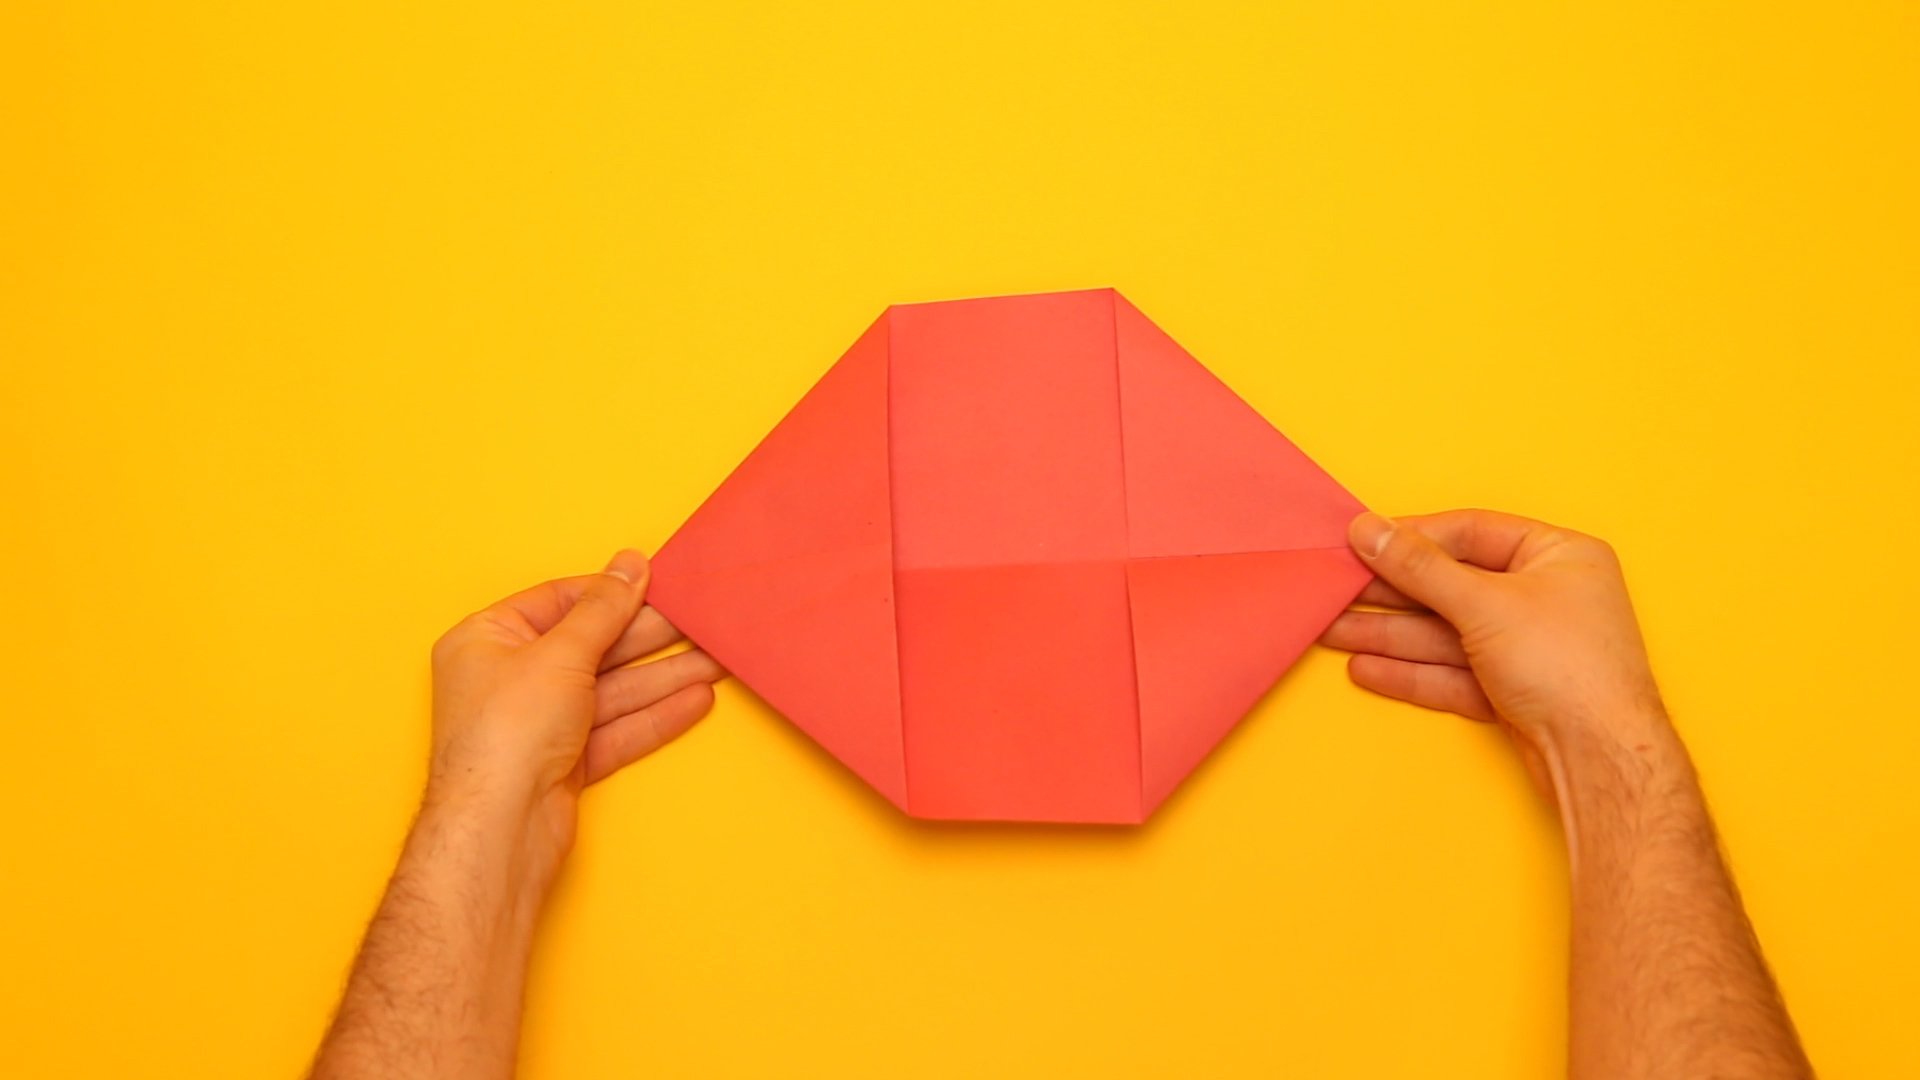 Fold each of the four corners into triangles